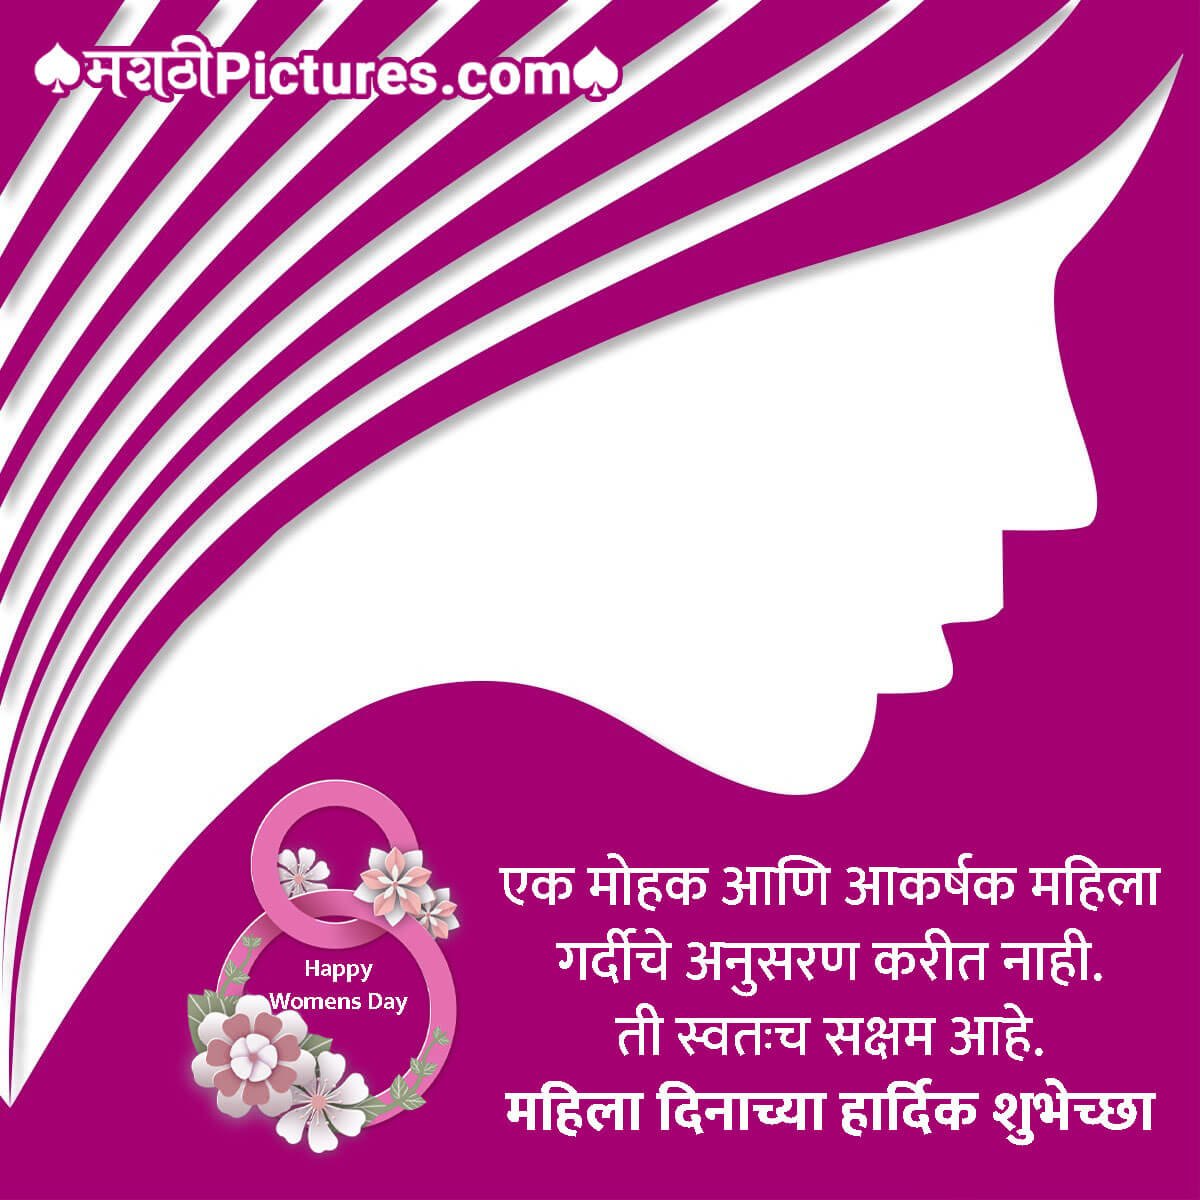 Women's Day Wishes For Female Colleague In Marathi